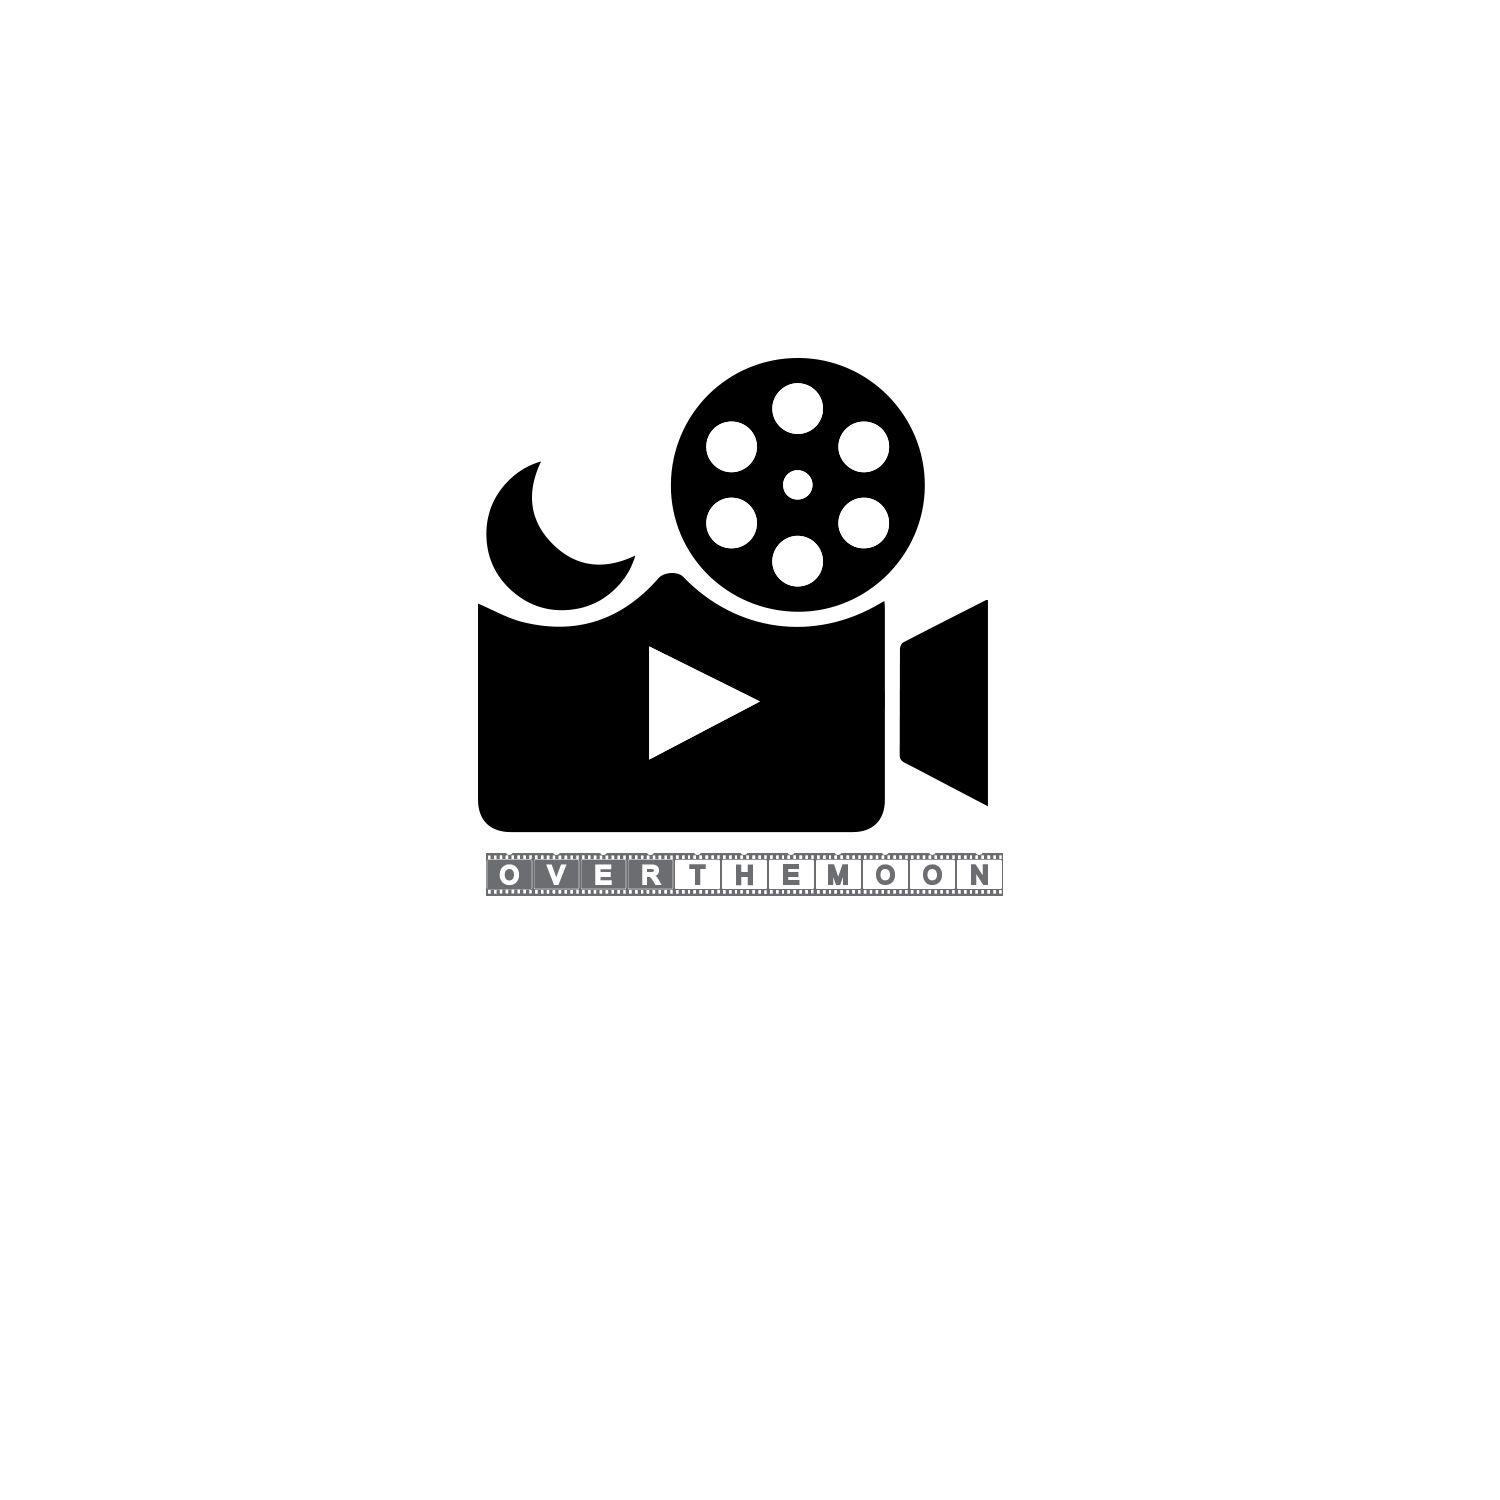 Movie Production Logo - Professional, Serious, Movie Production Logo Design for OVER THE ...